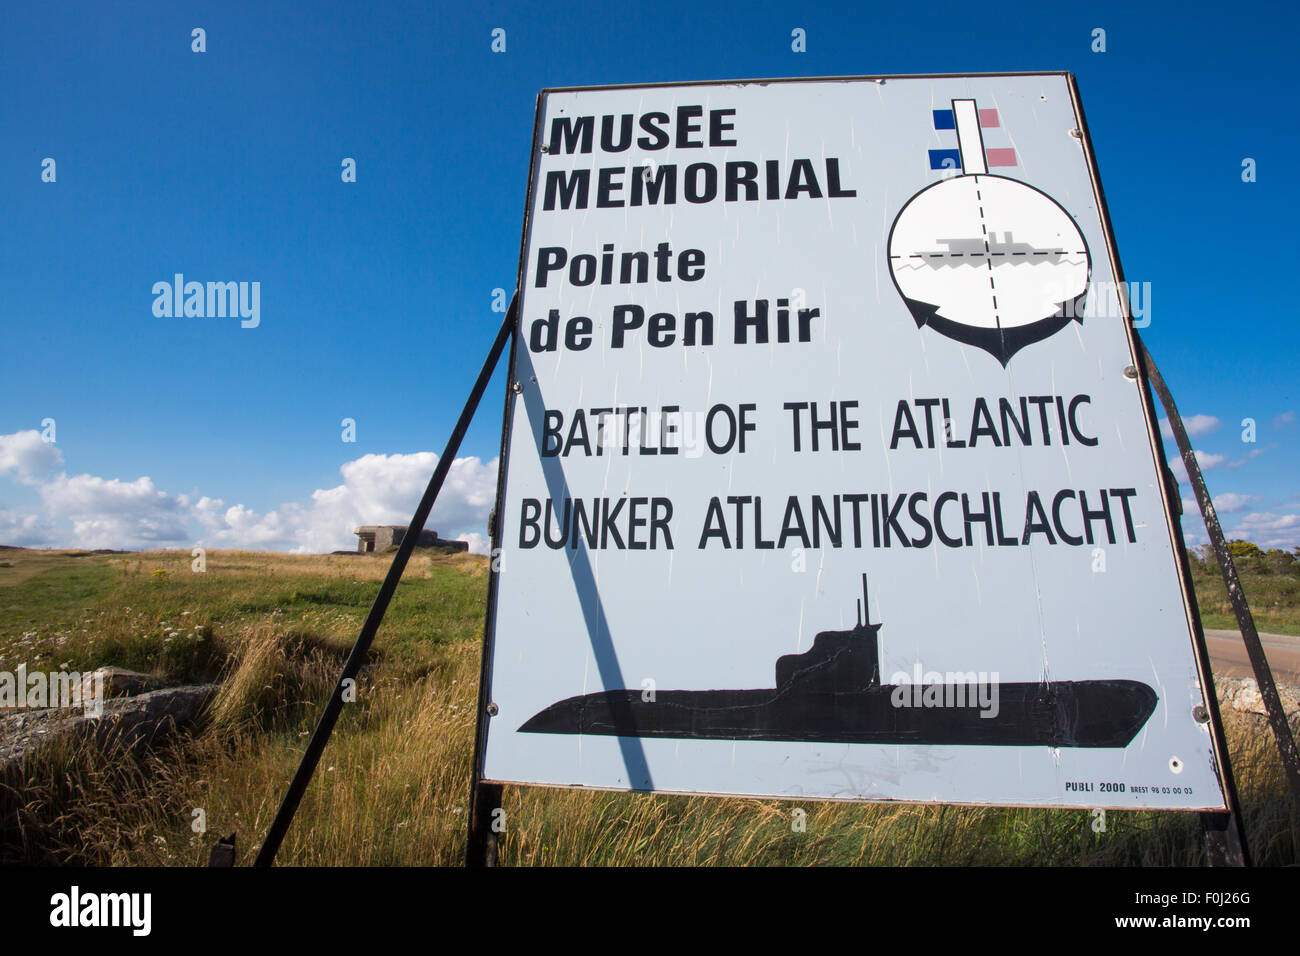 Memorial of the battle of the Atlantic in Brittany, at the Pointe de Pen Hir. Stock Photo